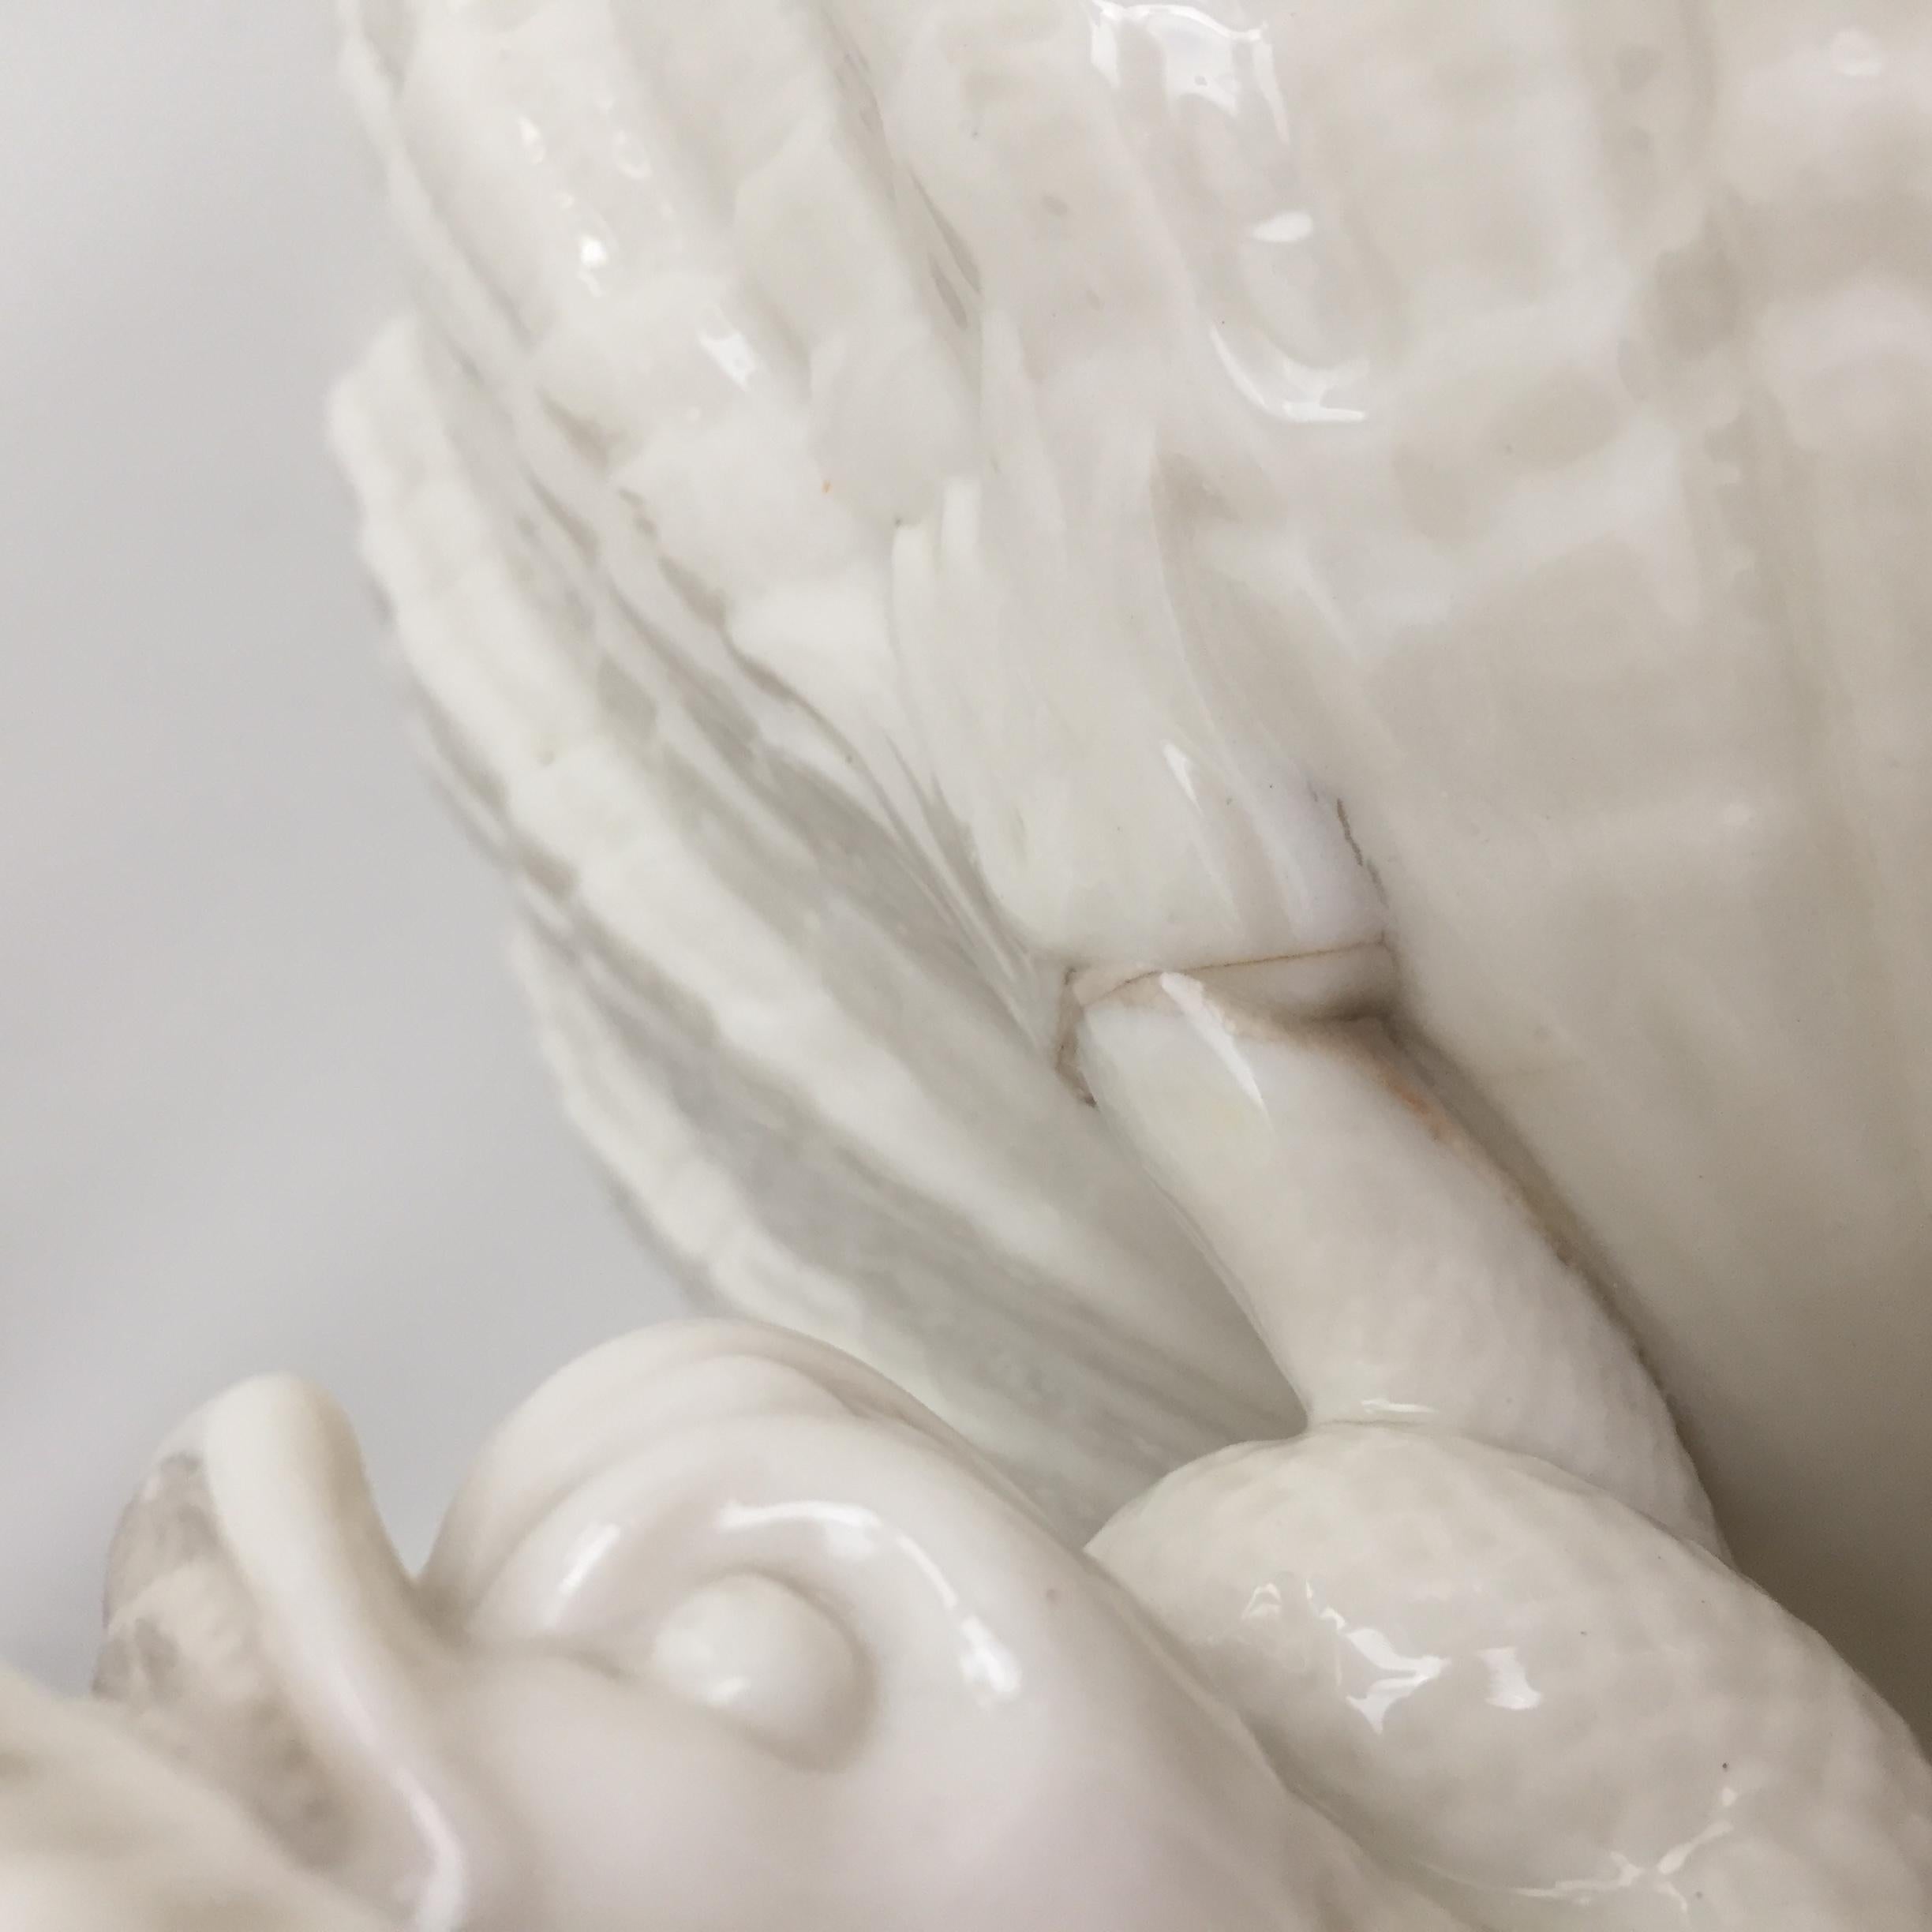 Belleek Comport, White Parian Porcelain on Dolphin Foot, Victorian, 1863-1891 4